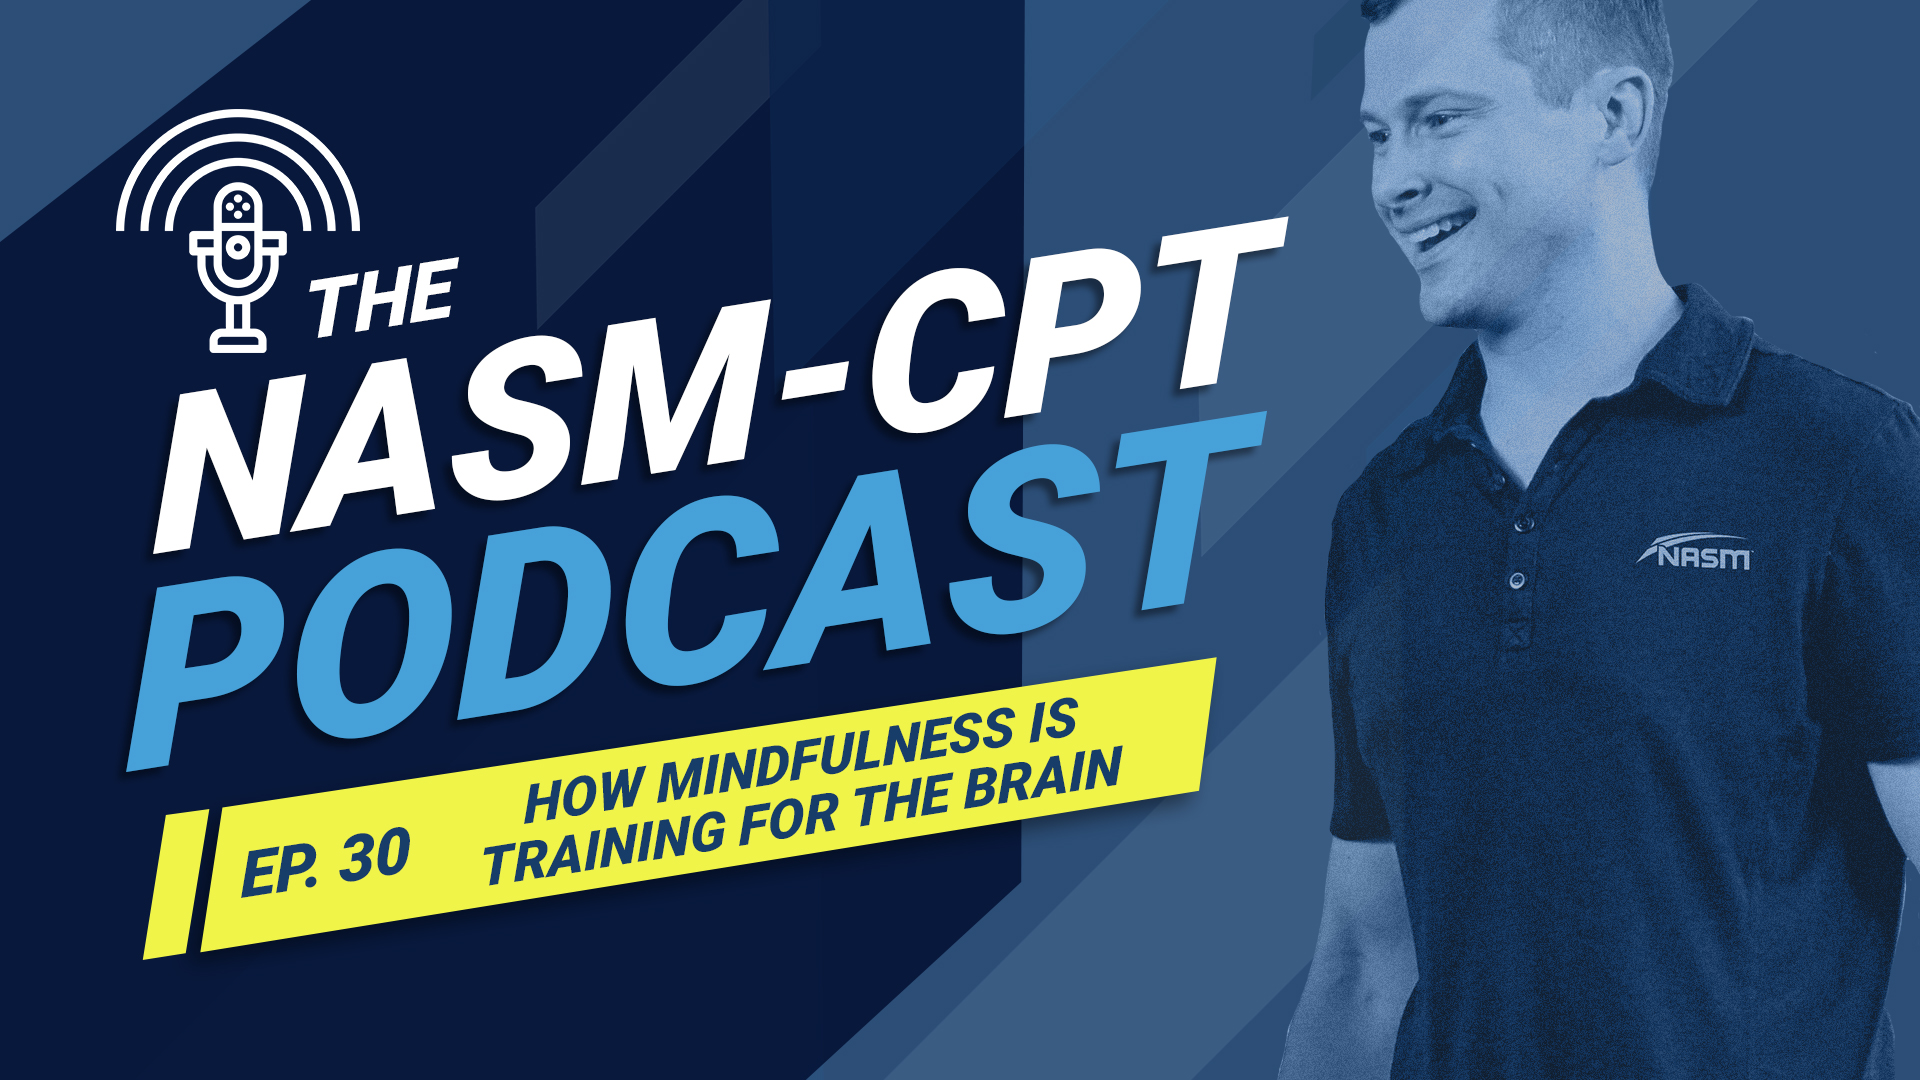 Sportstraining-Weightloss-CPT Podcast Ep. 30